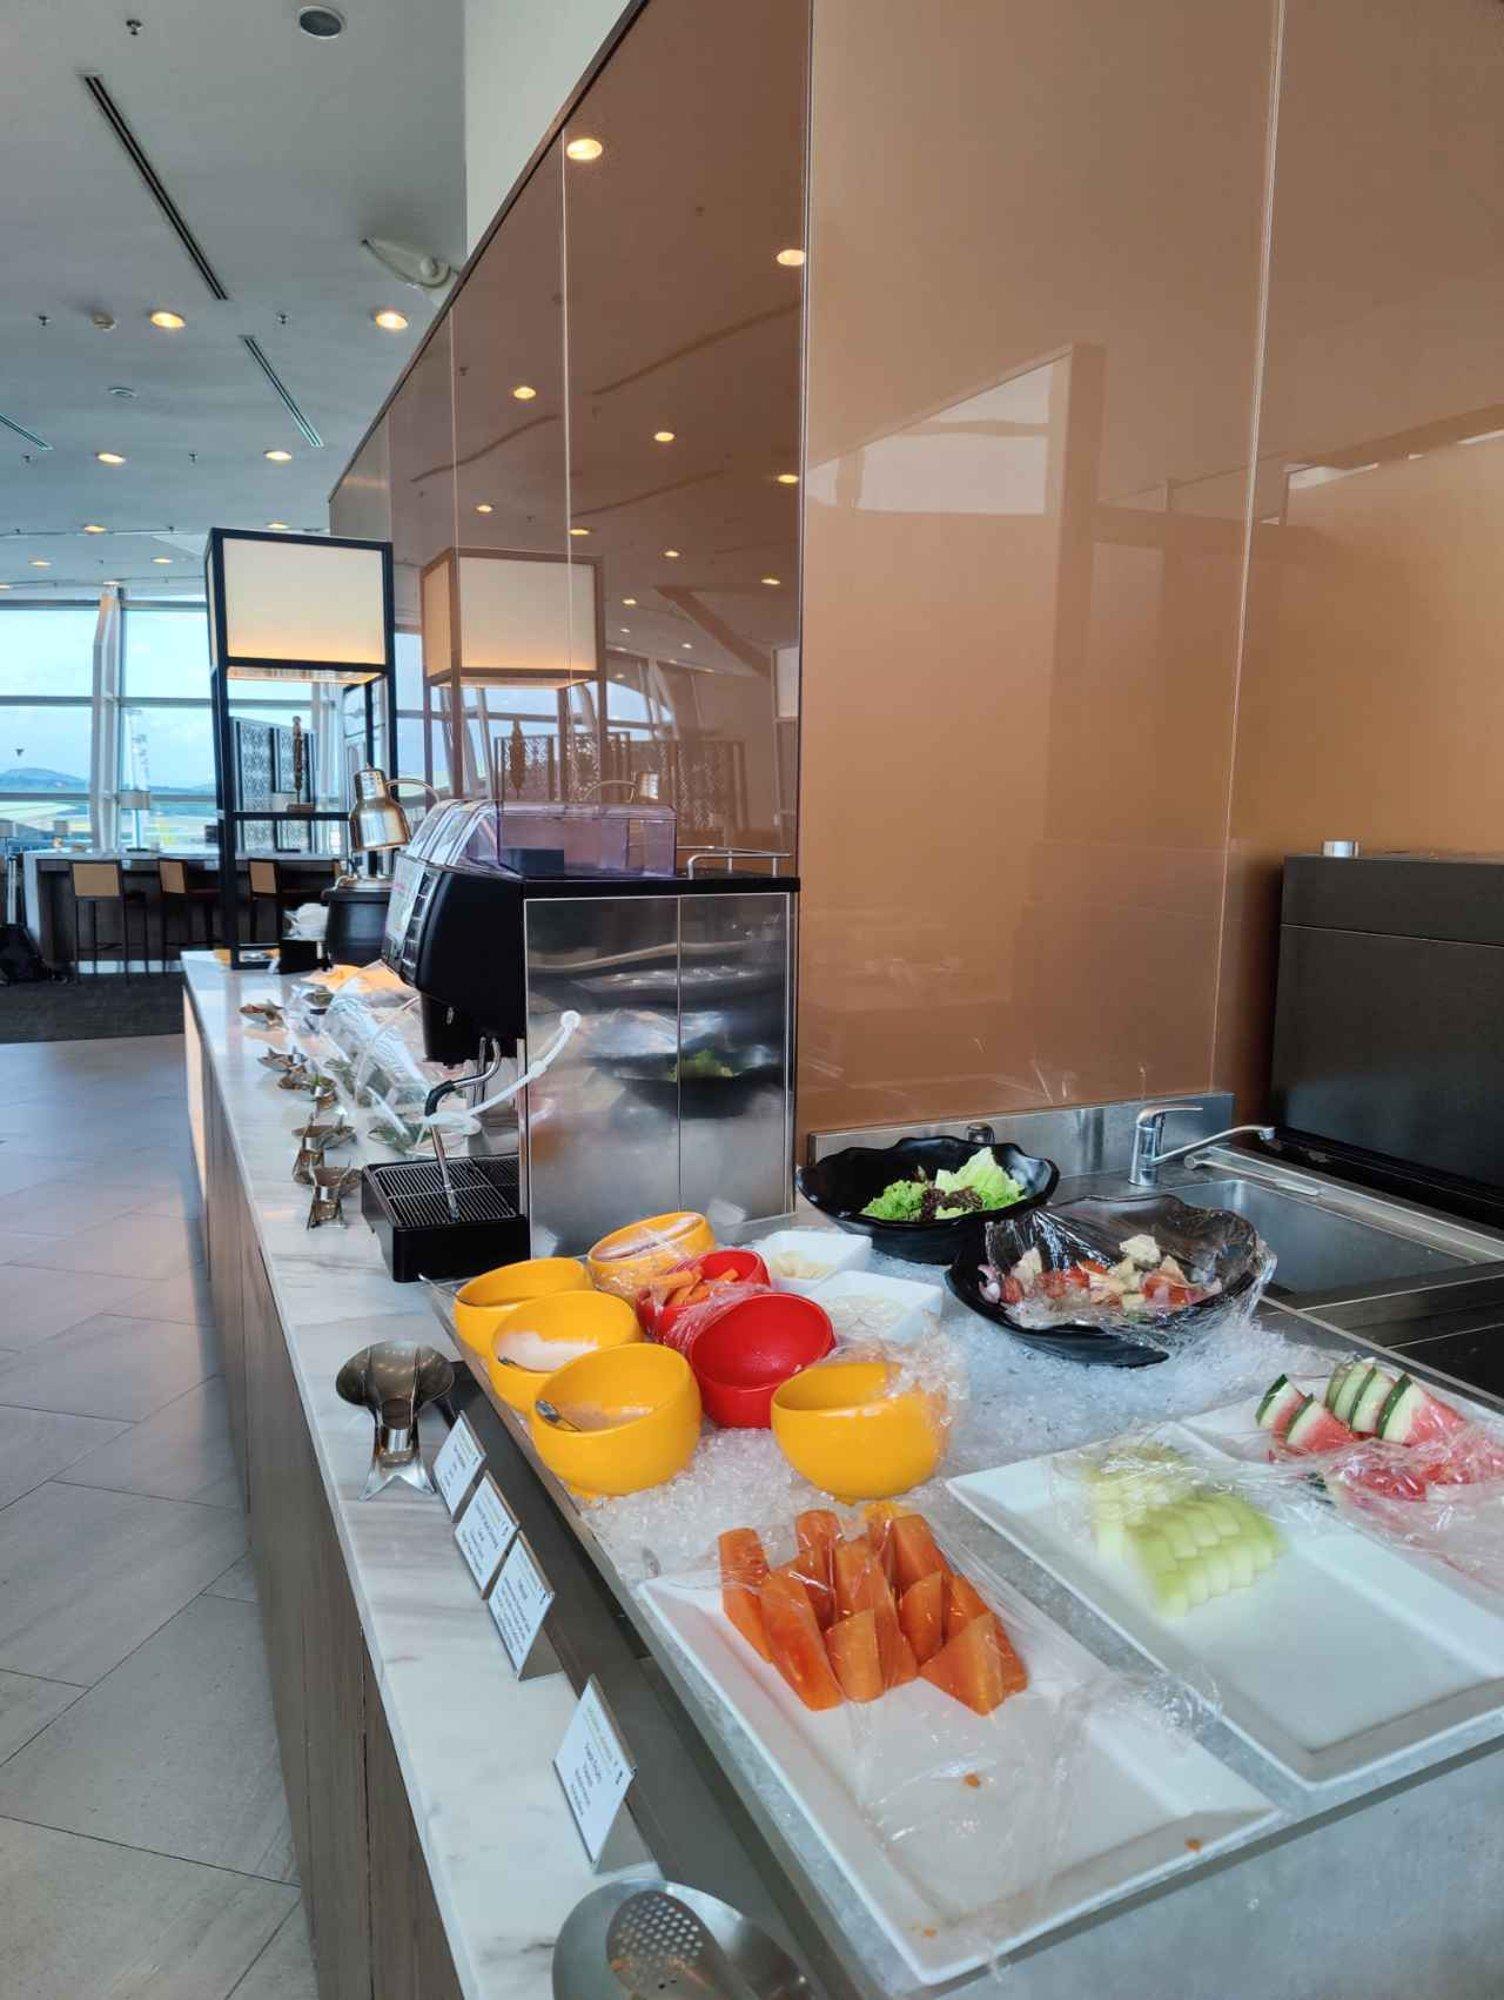 Malaysia Airlines Golden Lounge (Regional) image 12 of 13